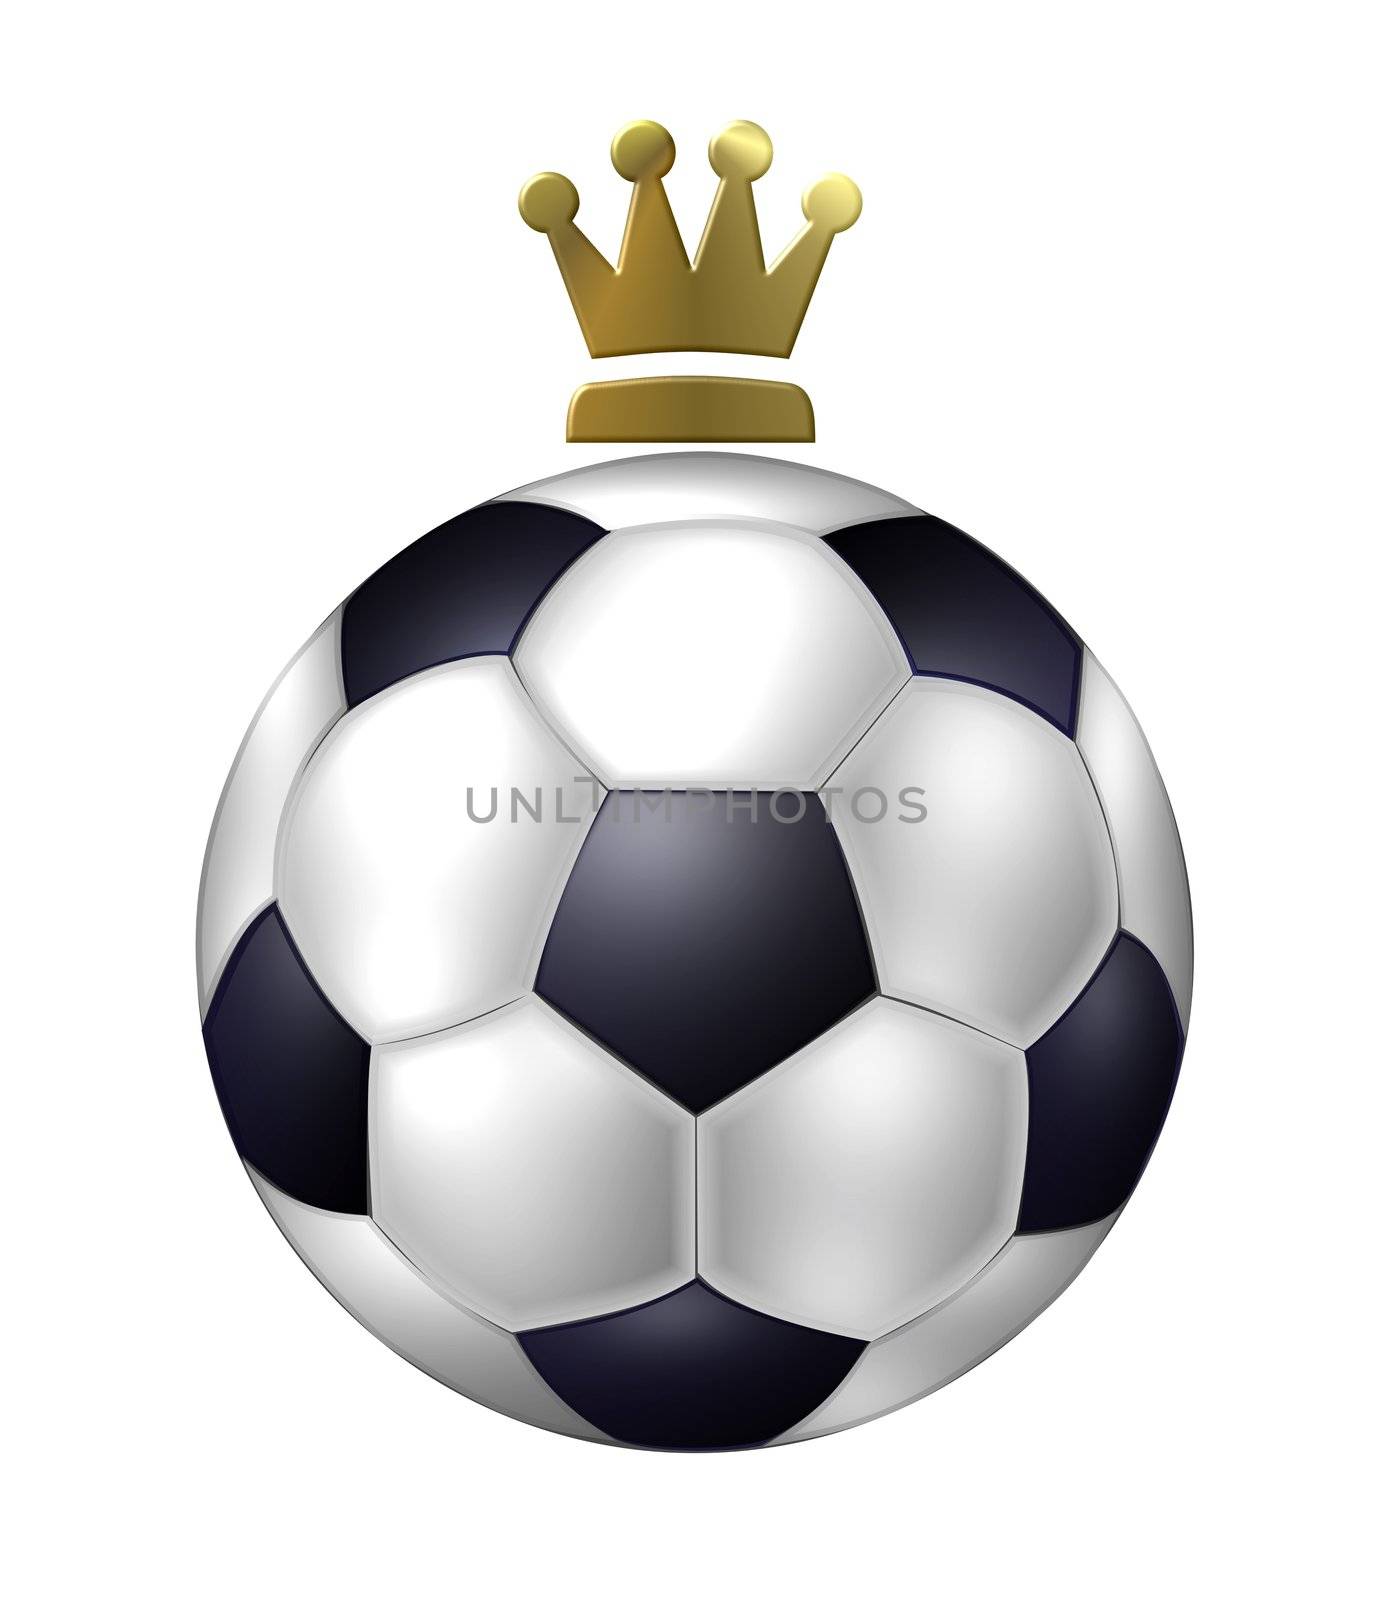 soccer ball with crown on top